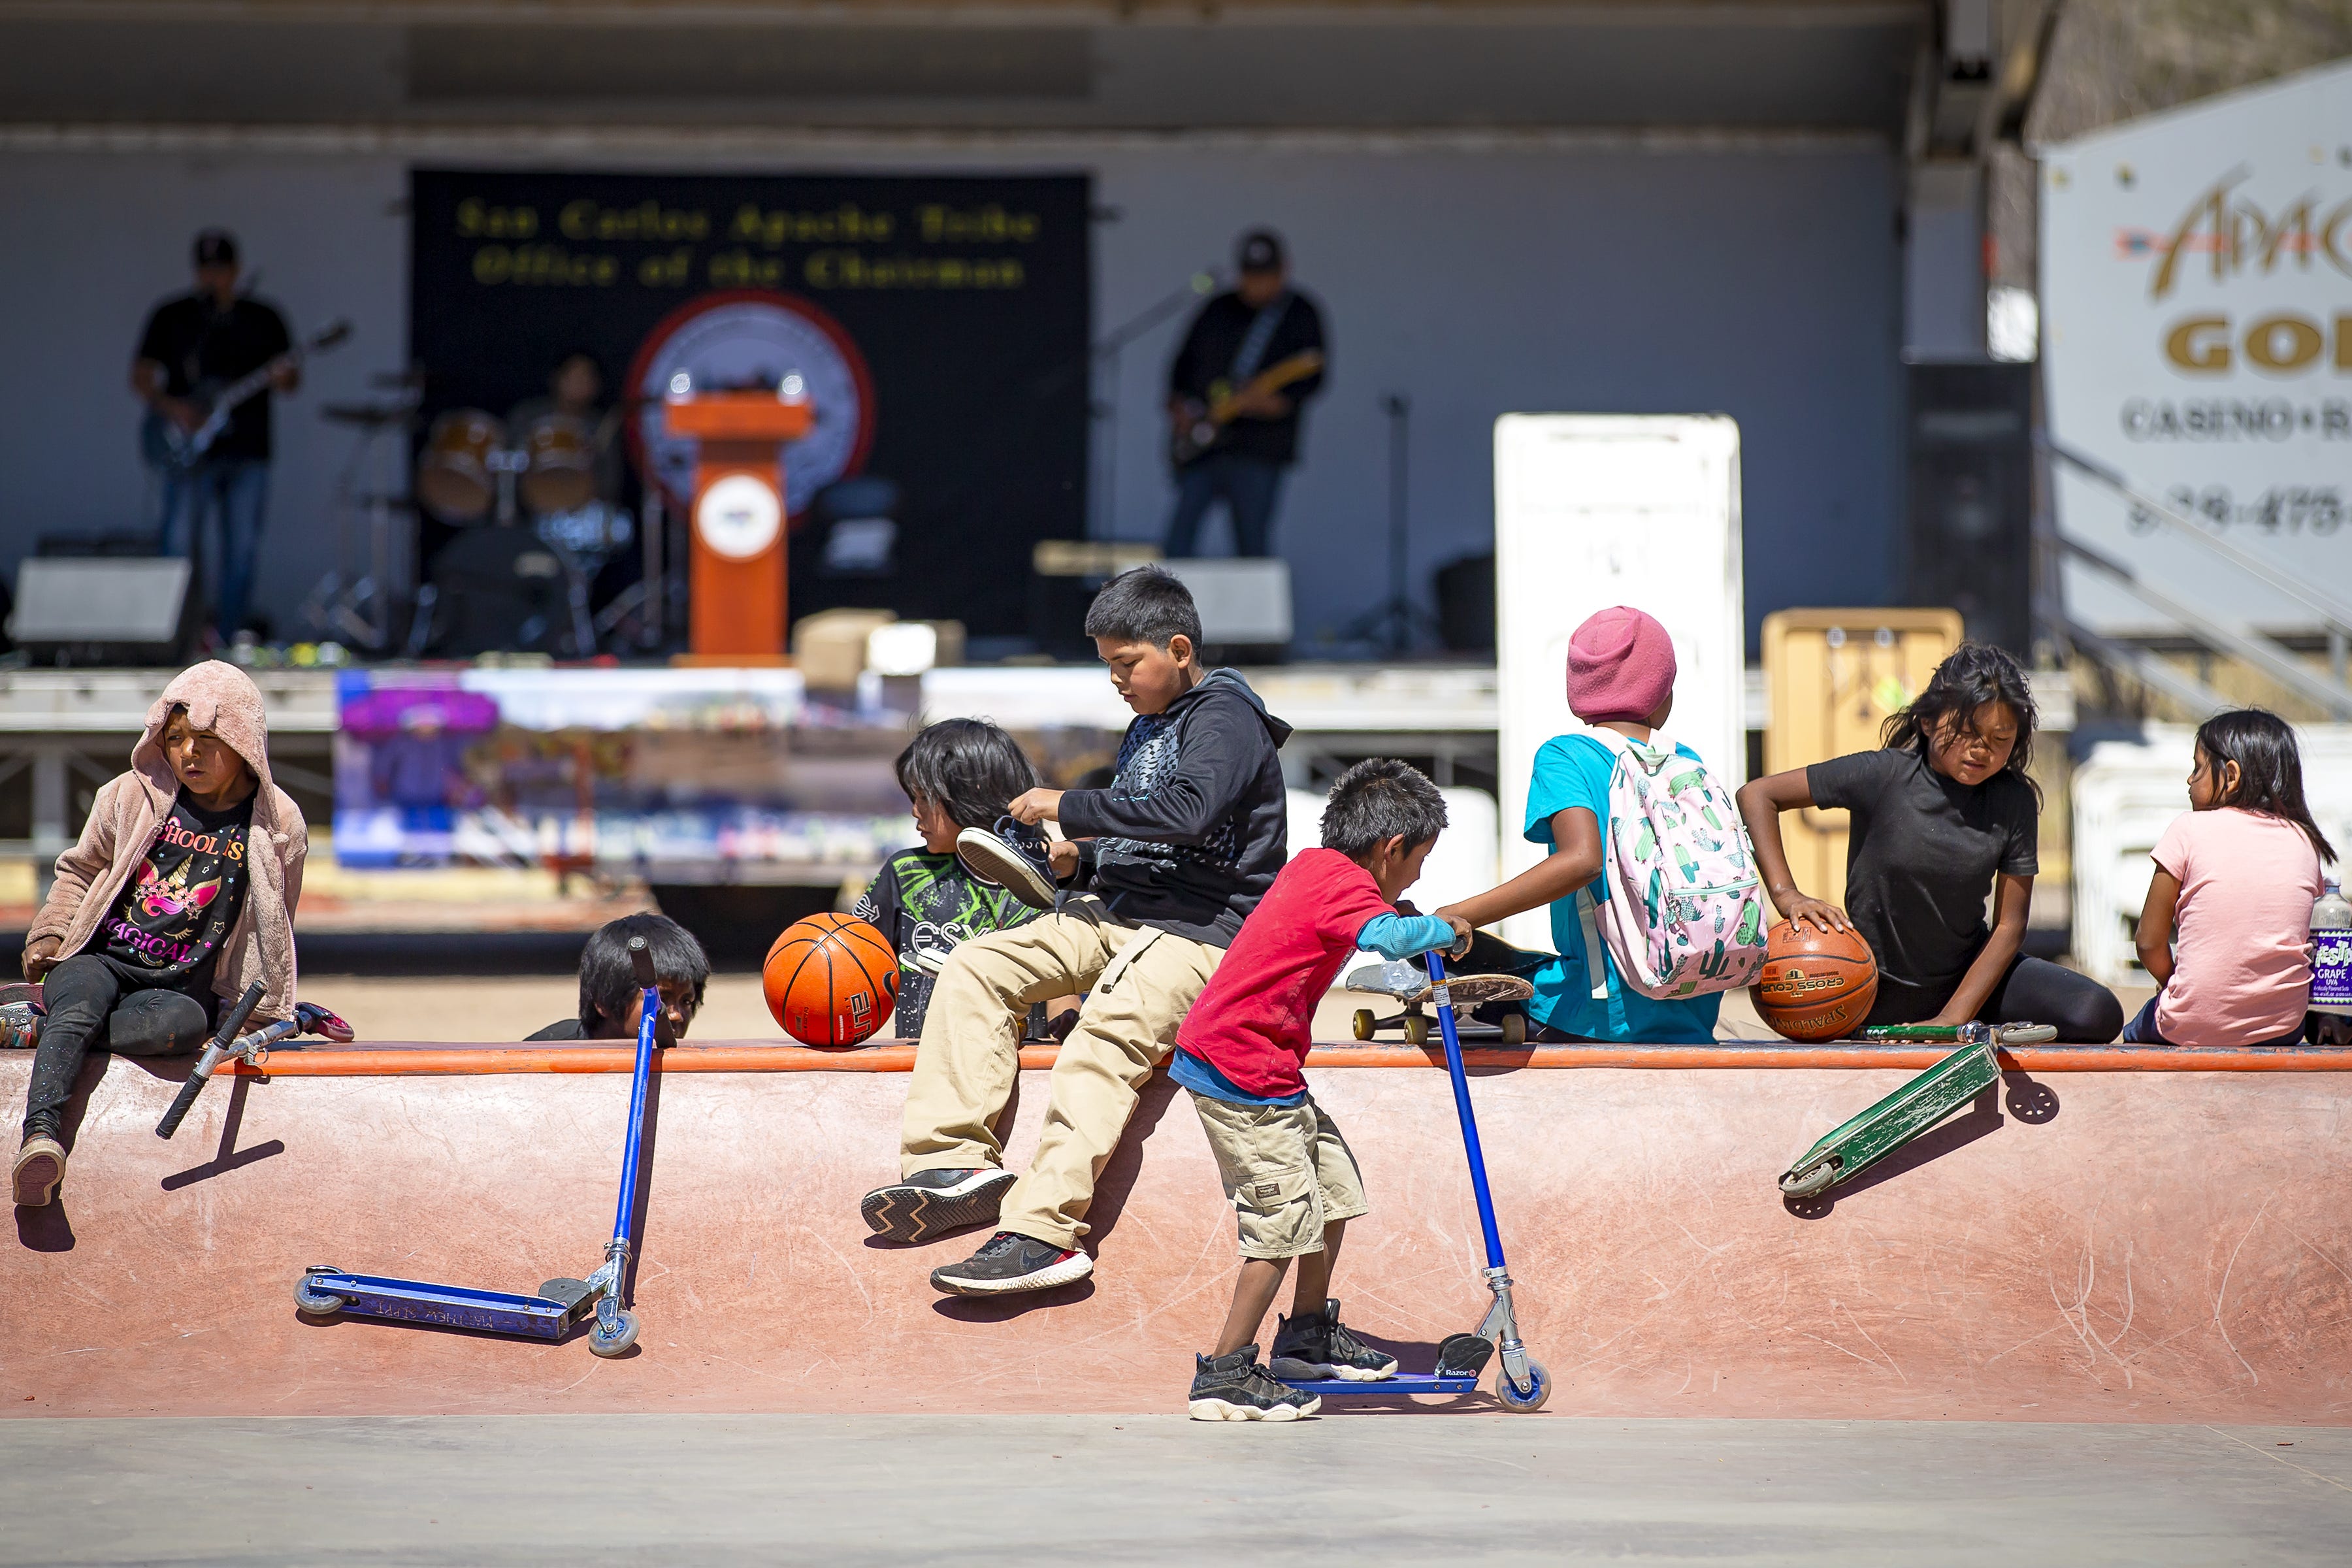 A group of children sit on a ledge at the new skate park in San Carlos on April 1, 2022.